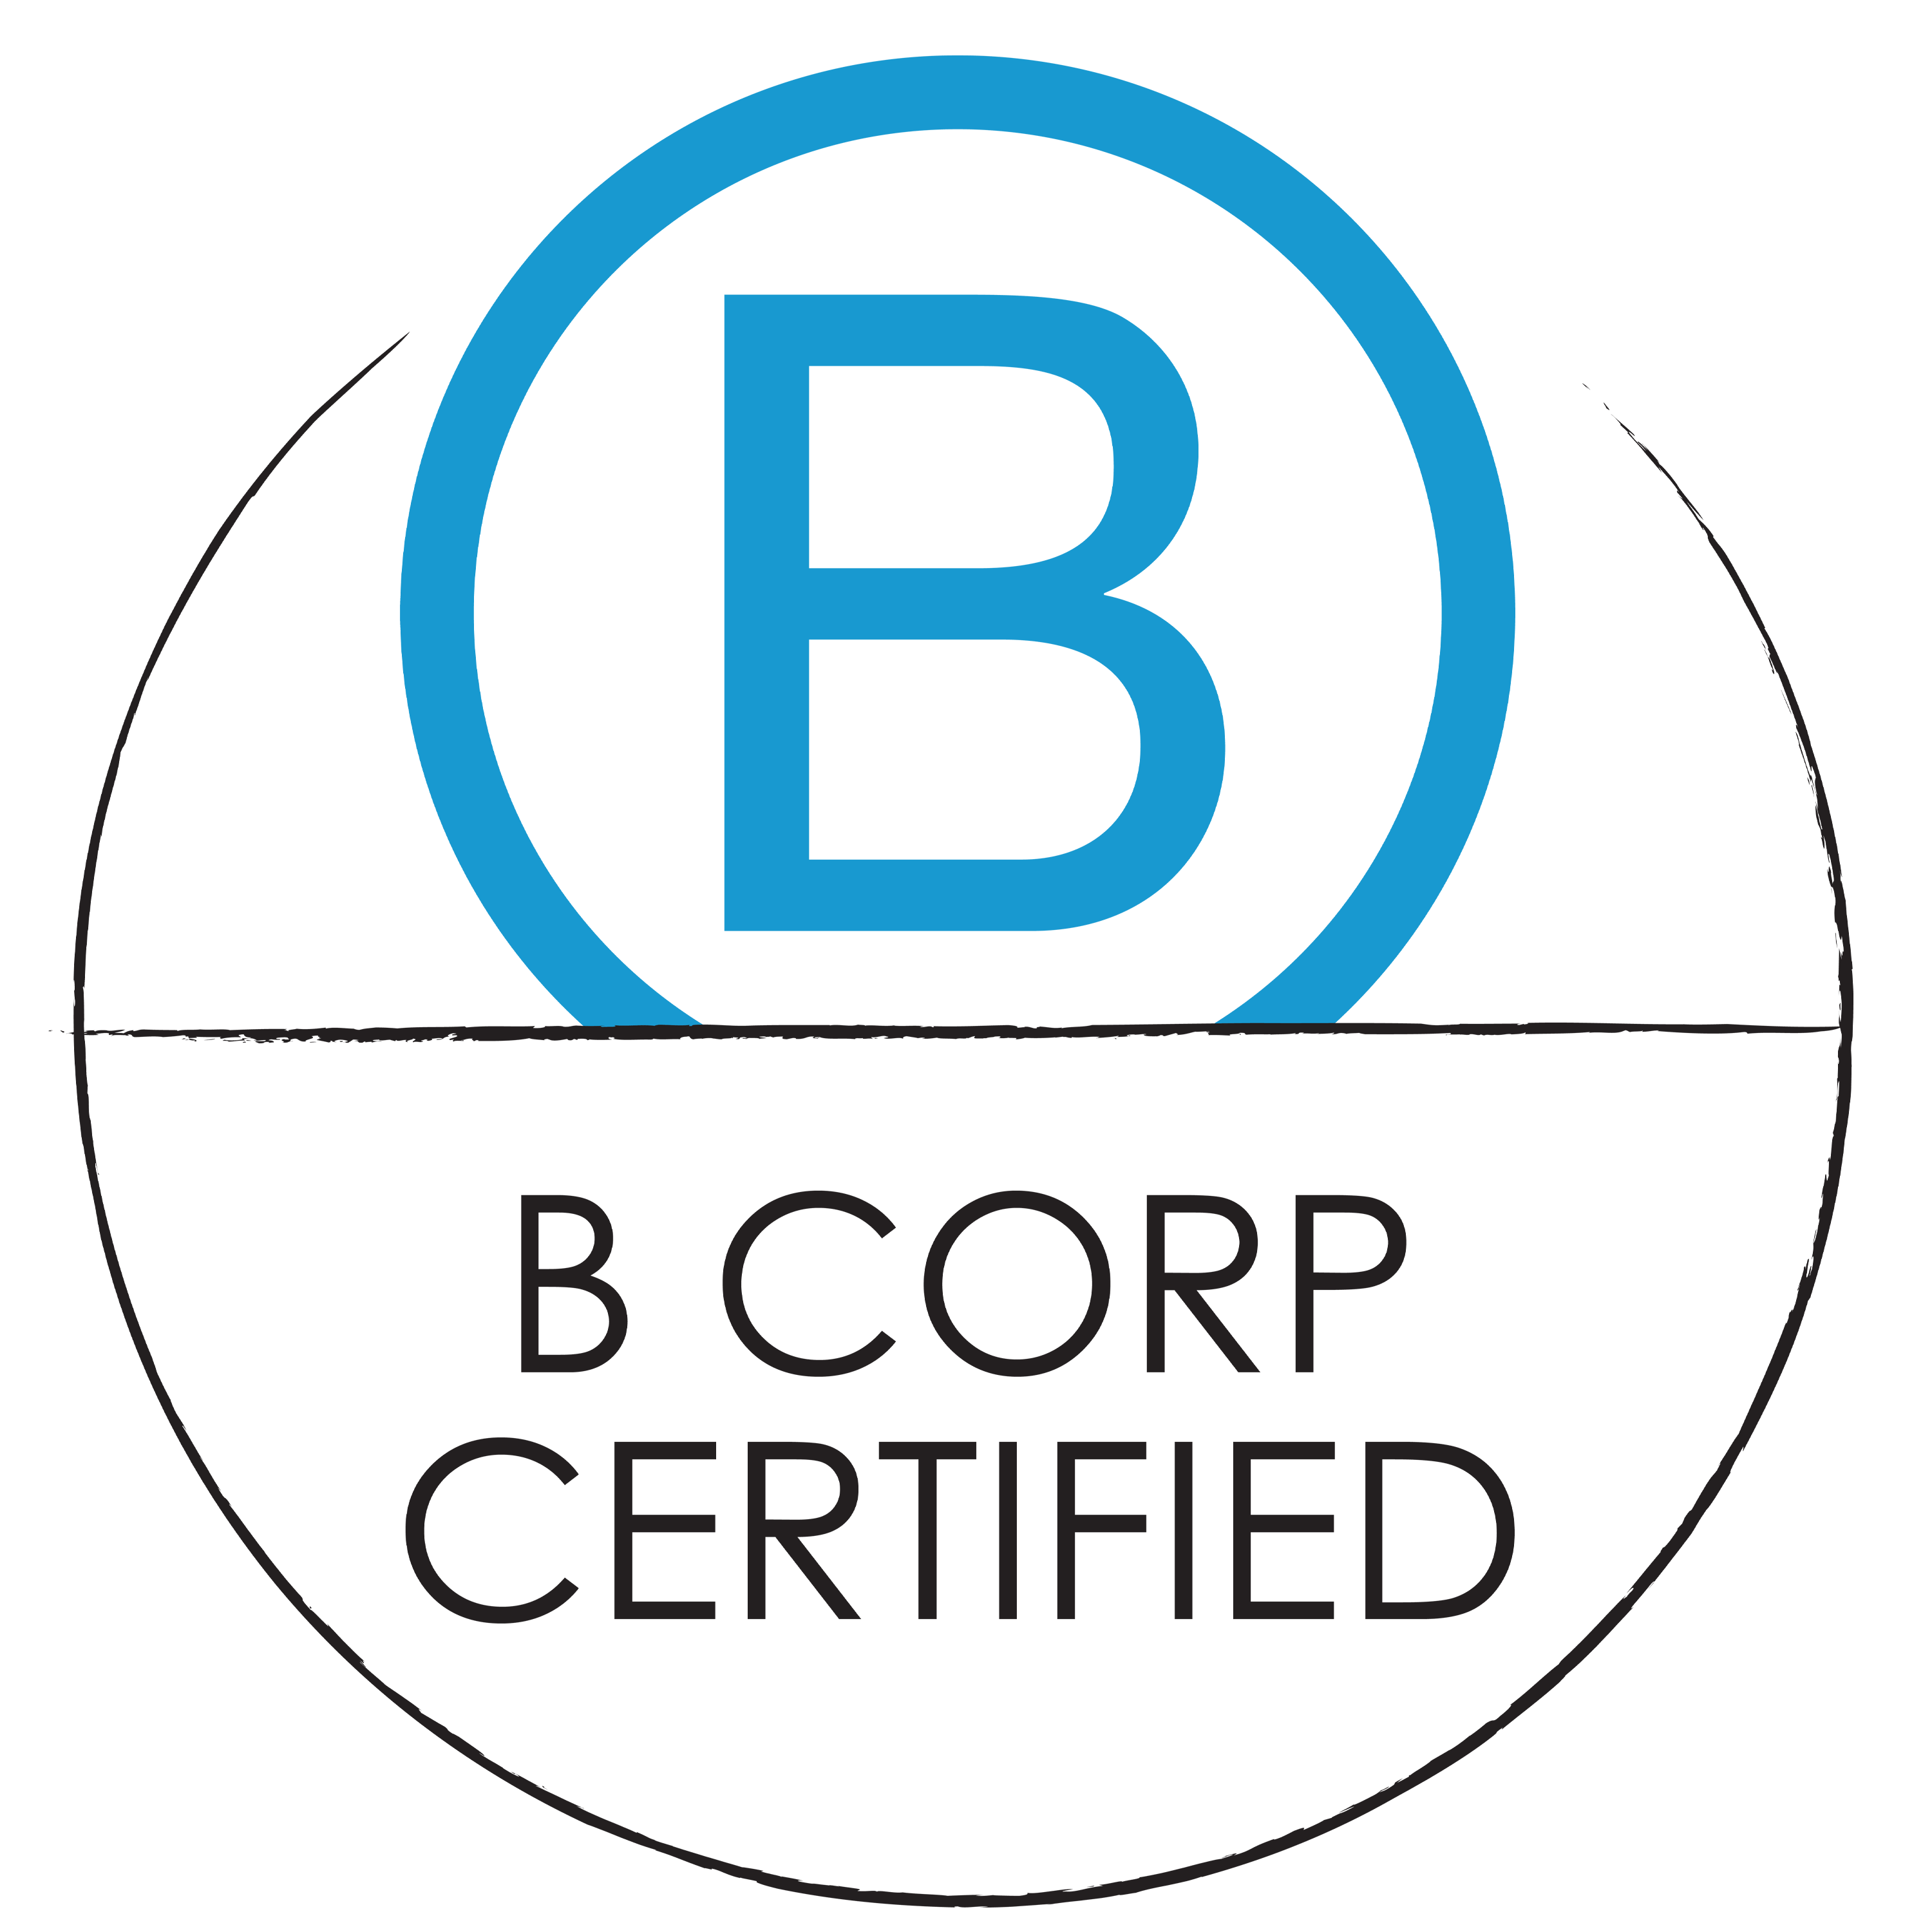 b corp certified icon